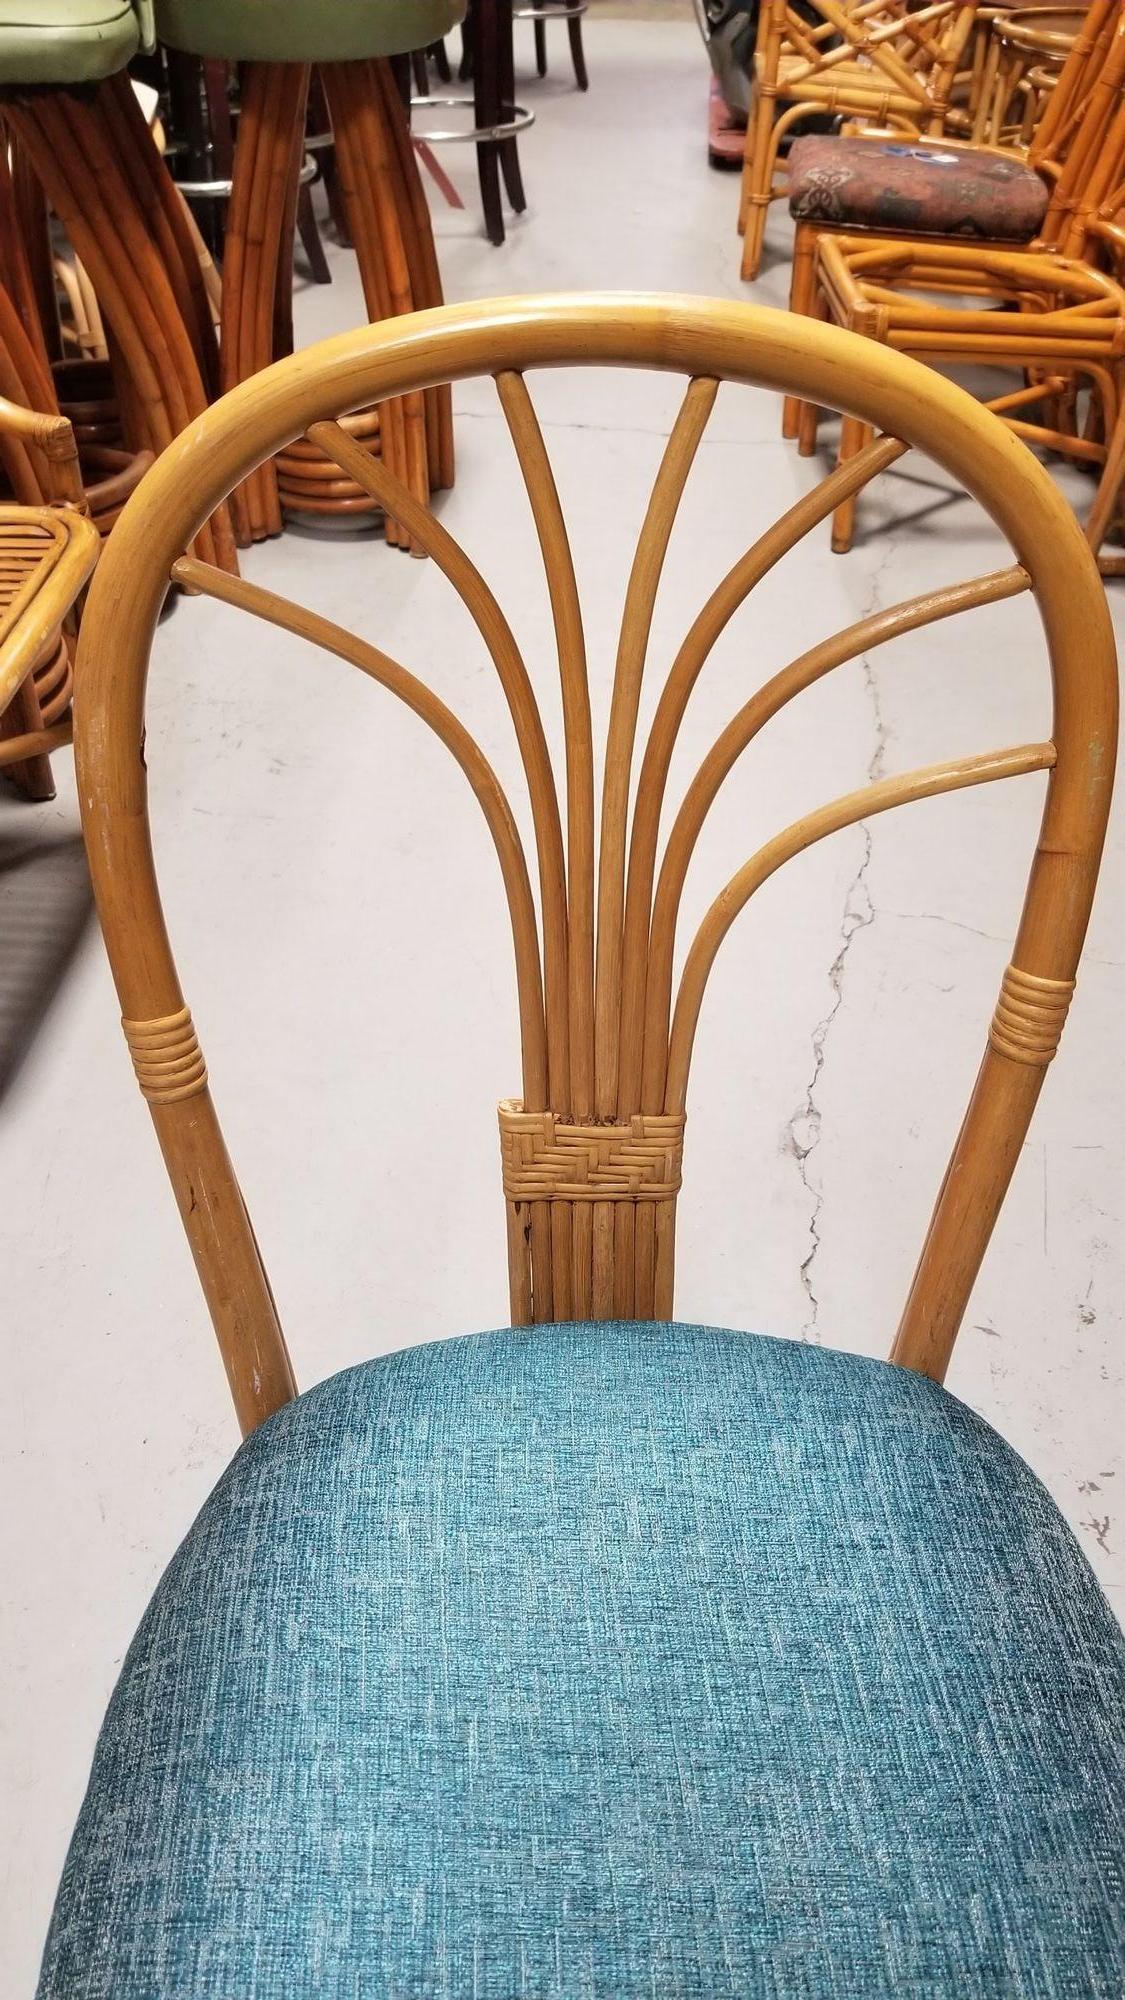 Pair of 1980s postmodern fan back rattan dining or accent side chairs in teal blue seat cushions.

Circa 1980s

We only purchase and sell only the best and finest rattan furniture made by the best and most well-known American designers and